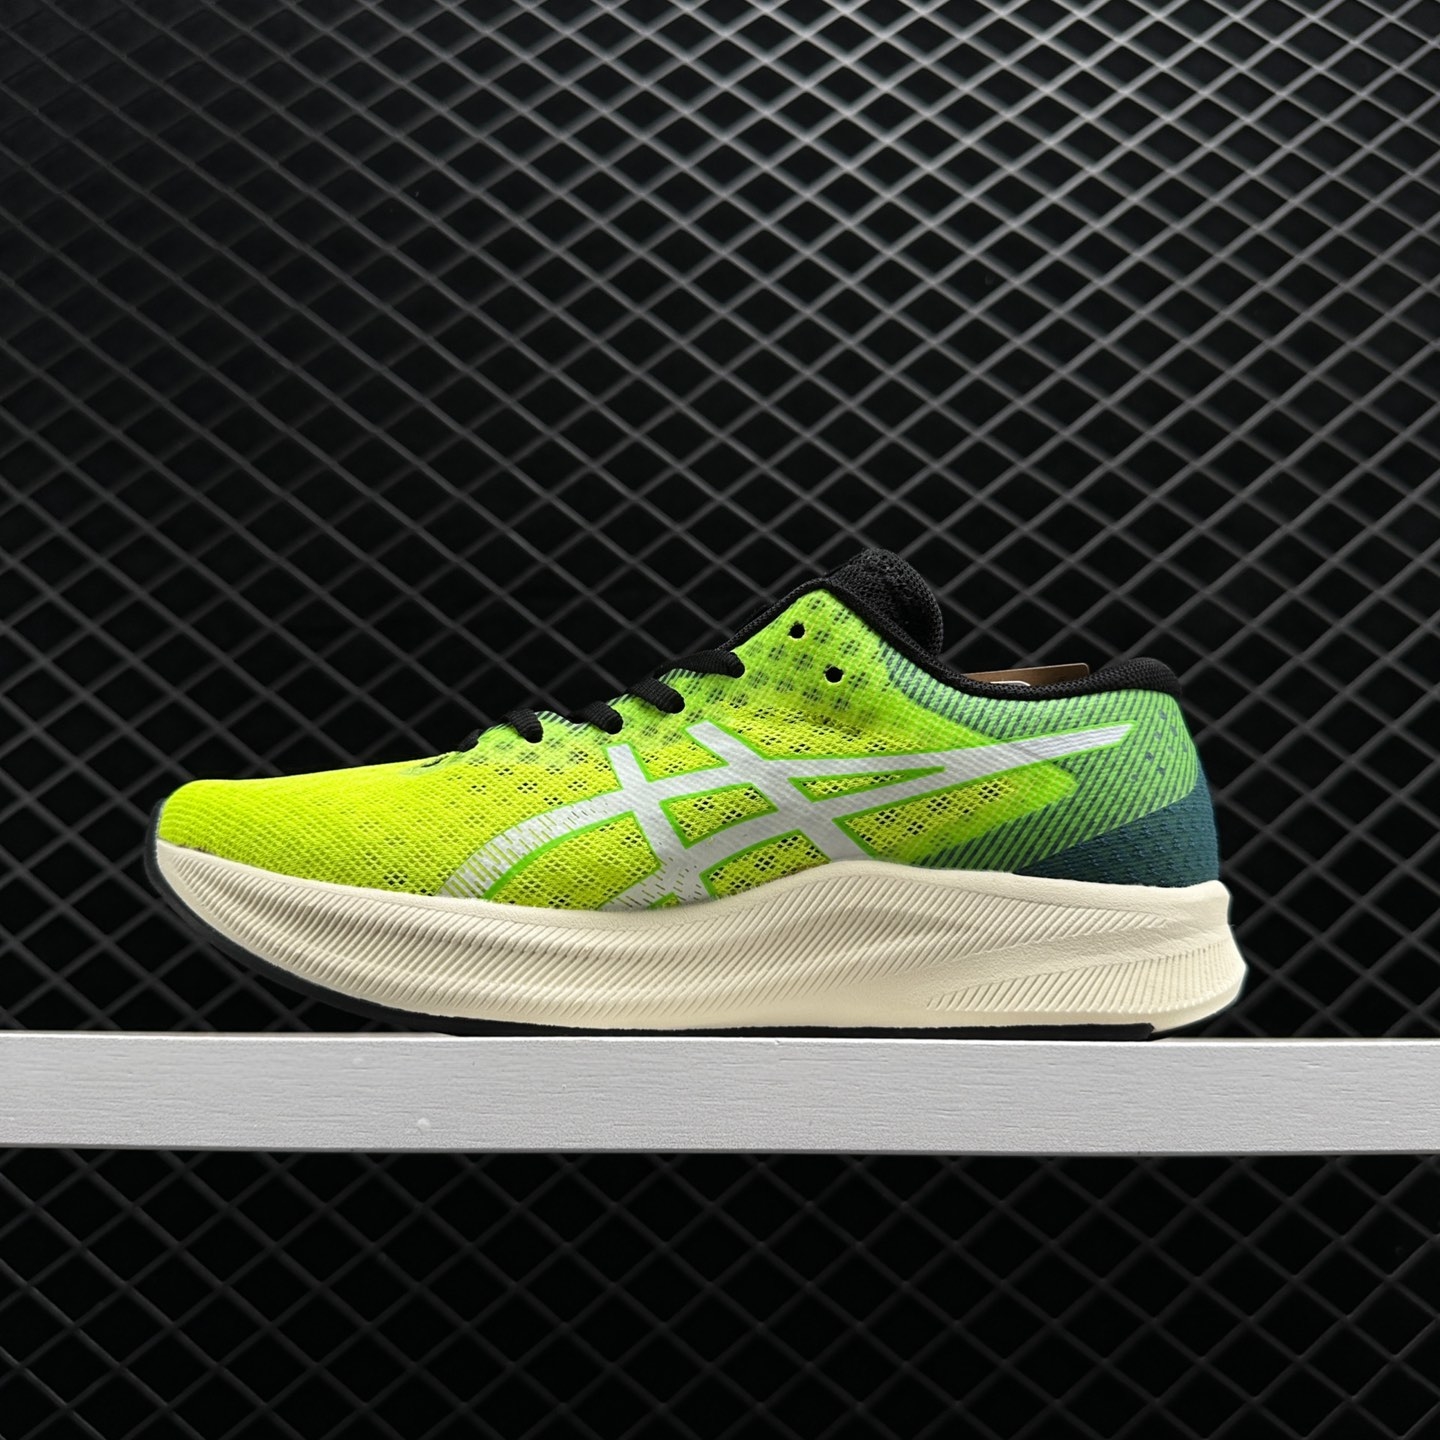 Asics Hyper Speed 2 2E Wide 'Safety Yellow White' 1011B494-750 - Shop Now!